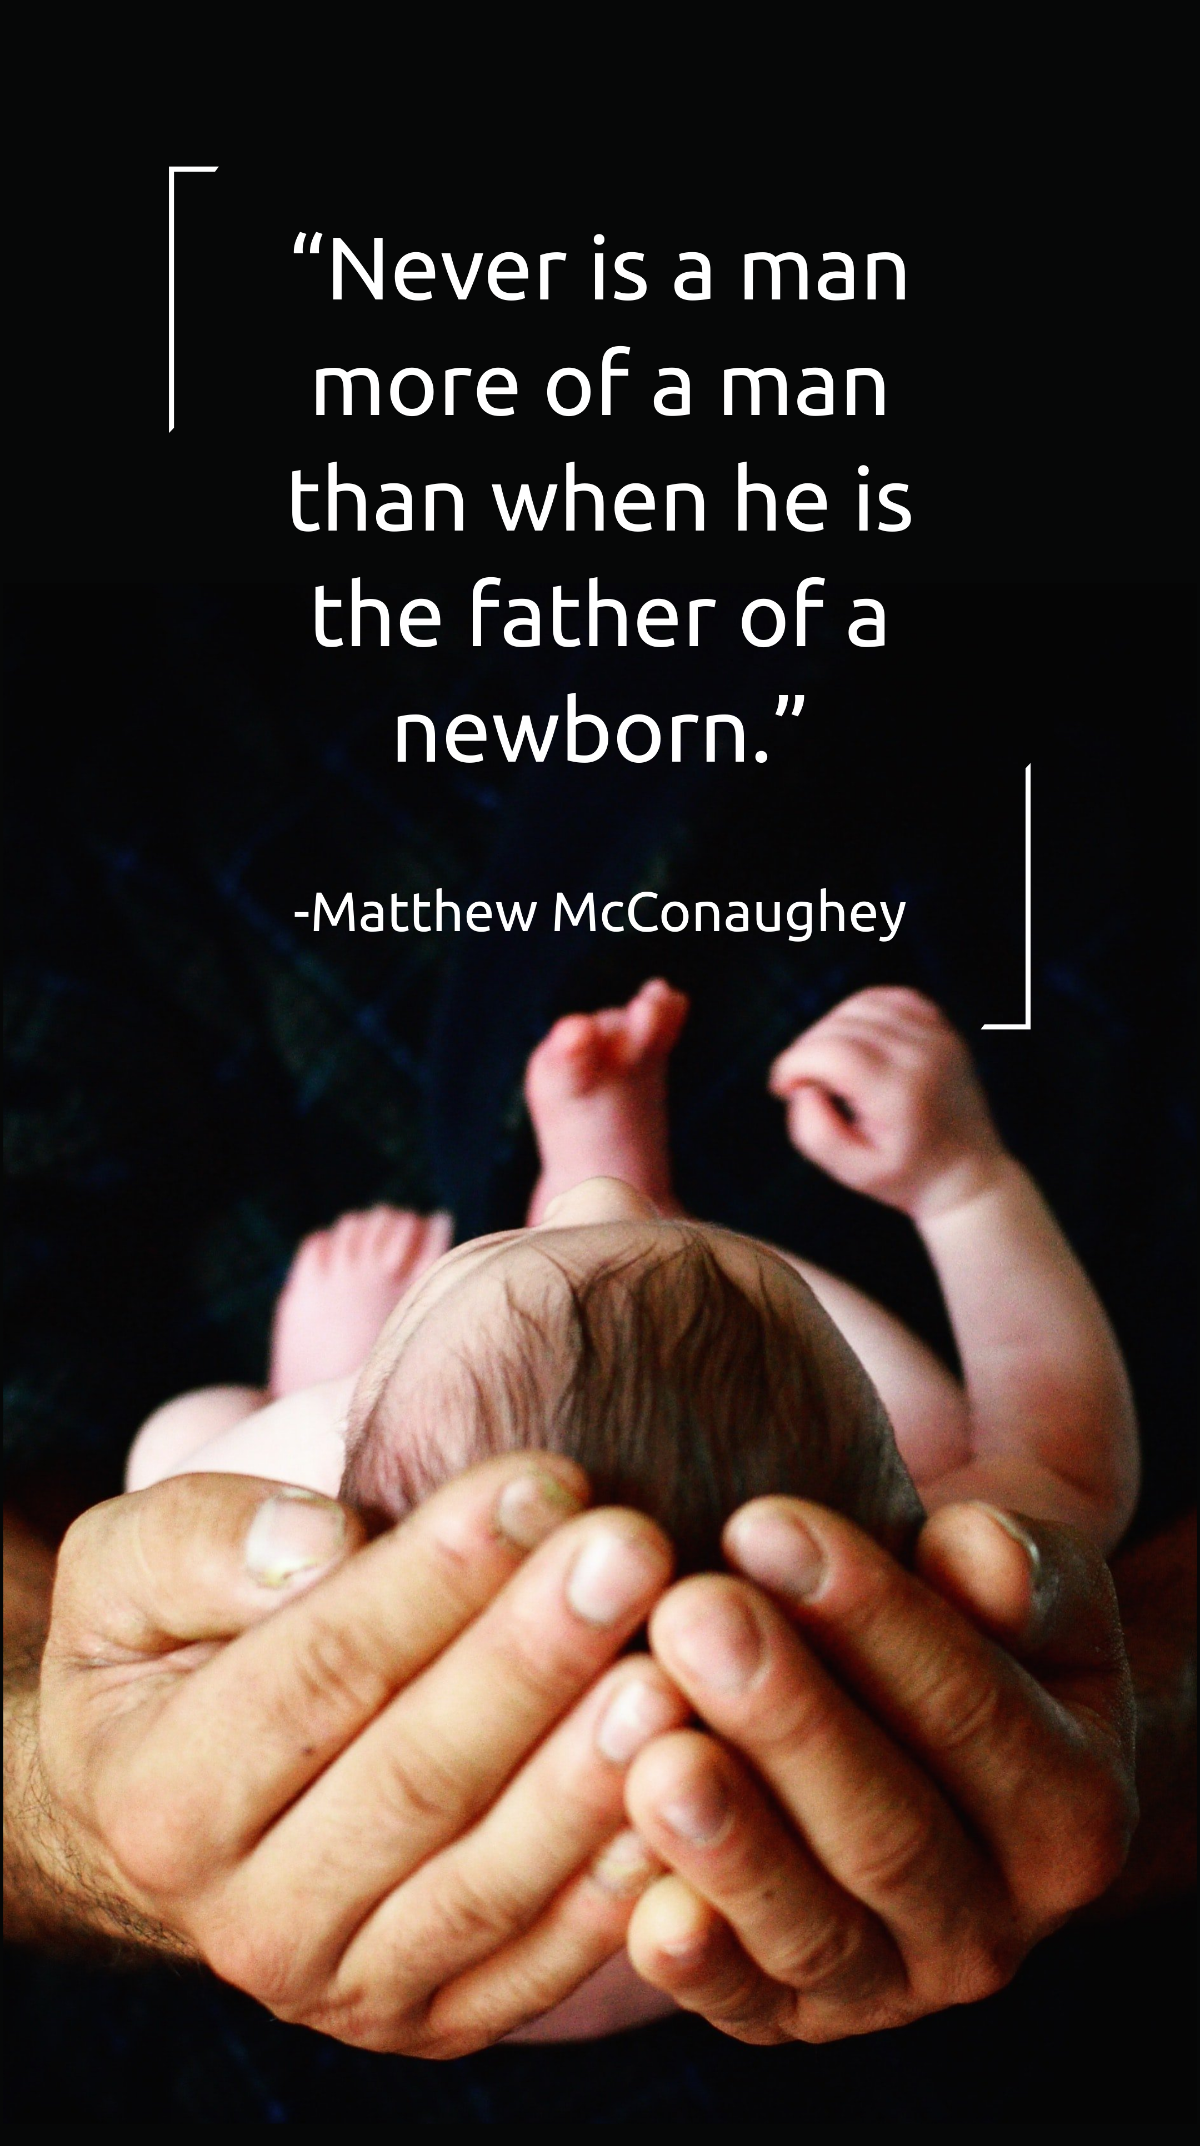 Matthew McConaughey - Never is a man more of a man than when he is the father of a newborn. Template